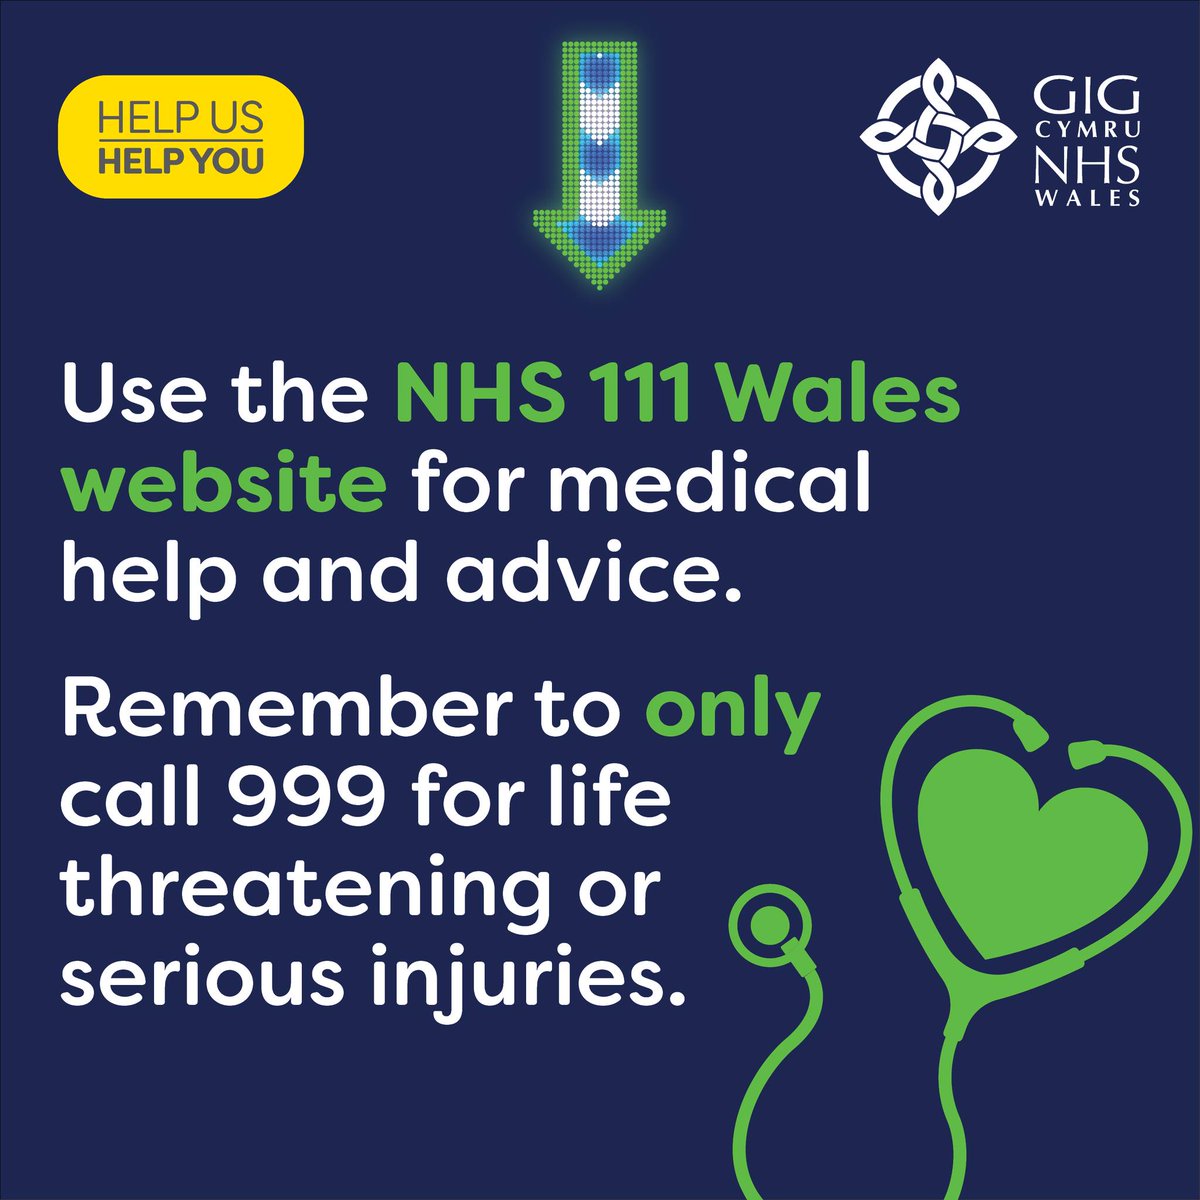 If you feel unwell and it’s not an emergency, the NHS 111 Wales website can help. Use NHS 111 Wales online to check your symptoms, access trusted healthcare advice, find your local pharmacy, minor injuries unit and other local services. 🔗 111.wales.nhs.uk